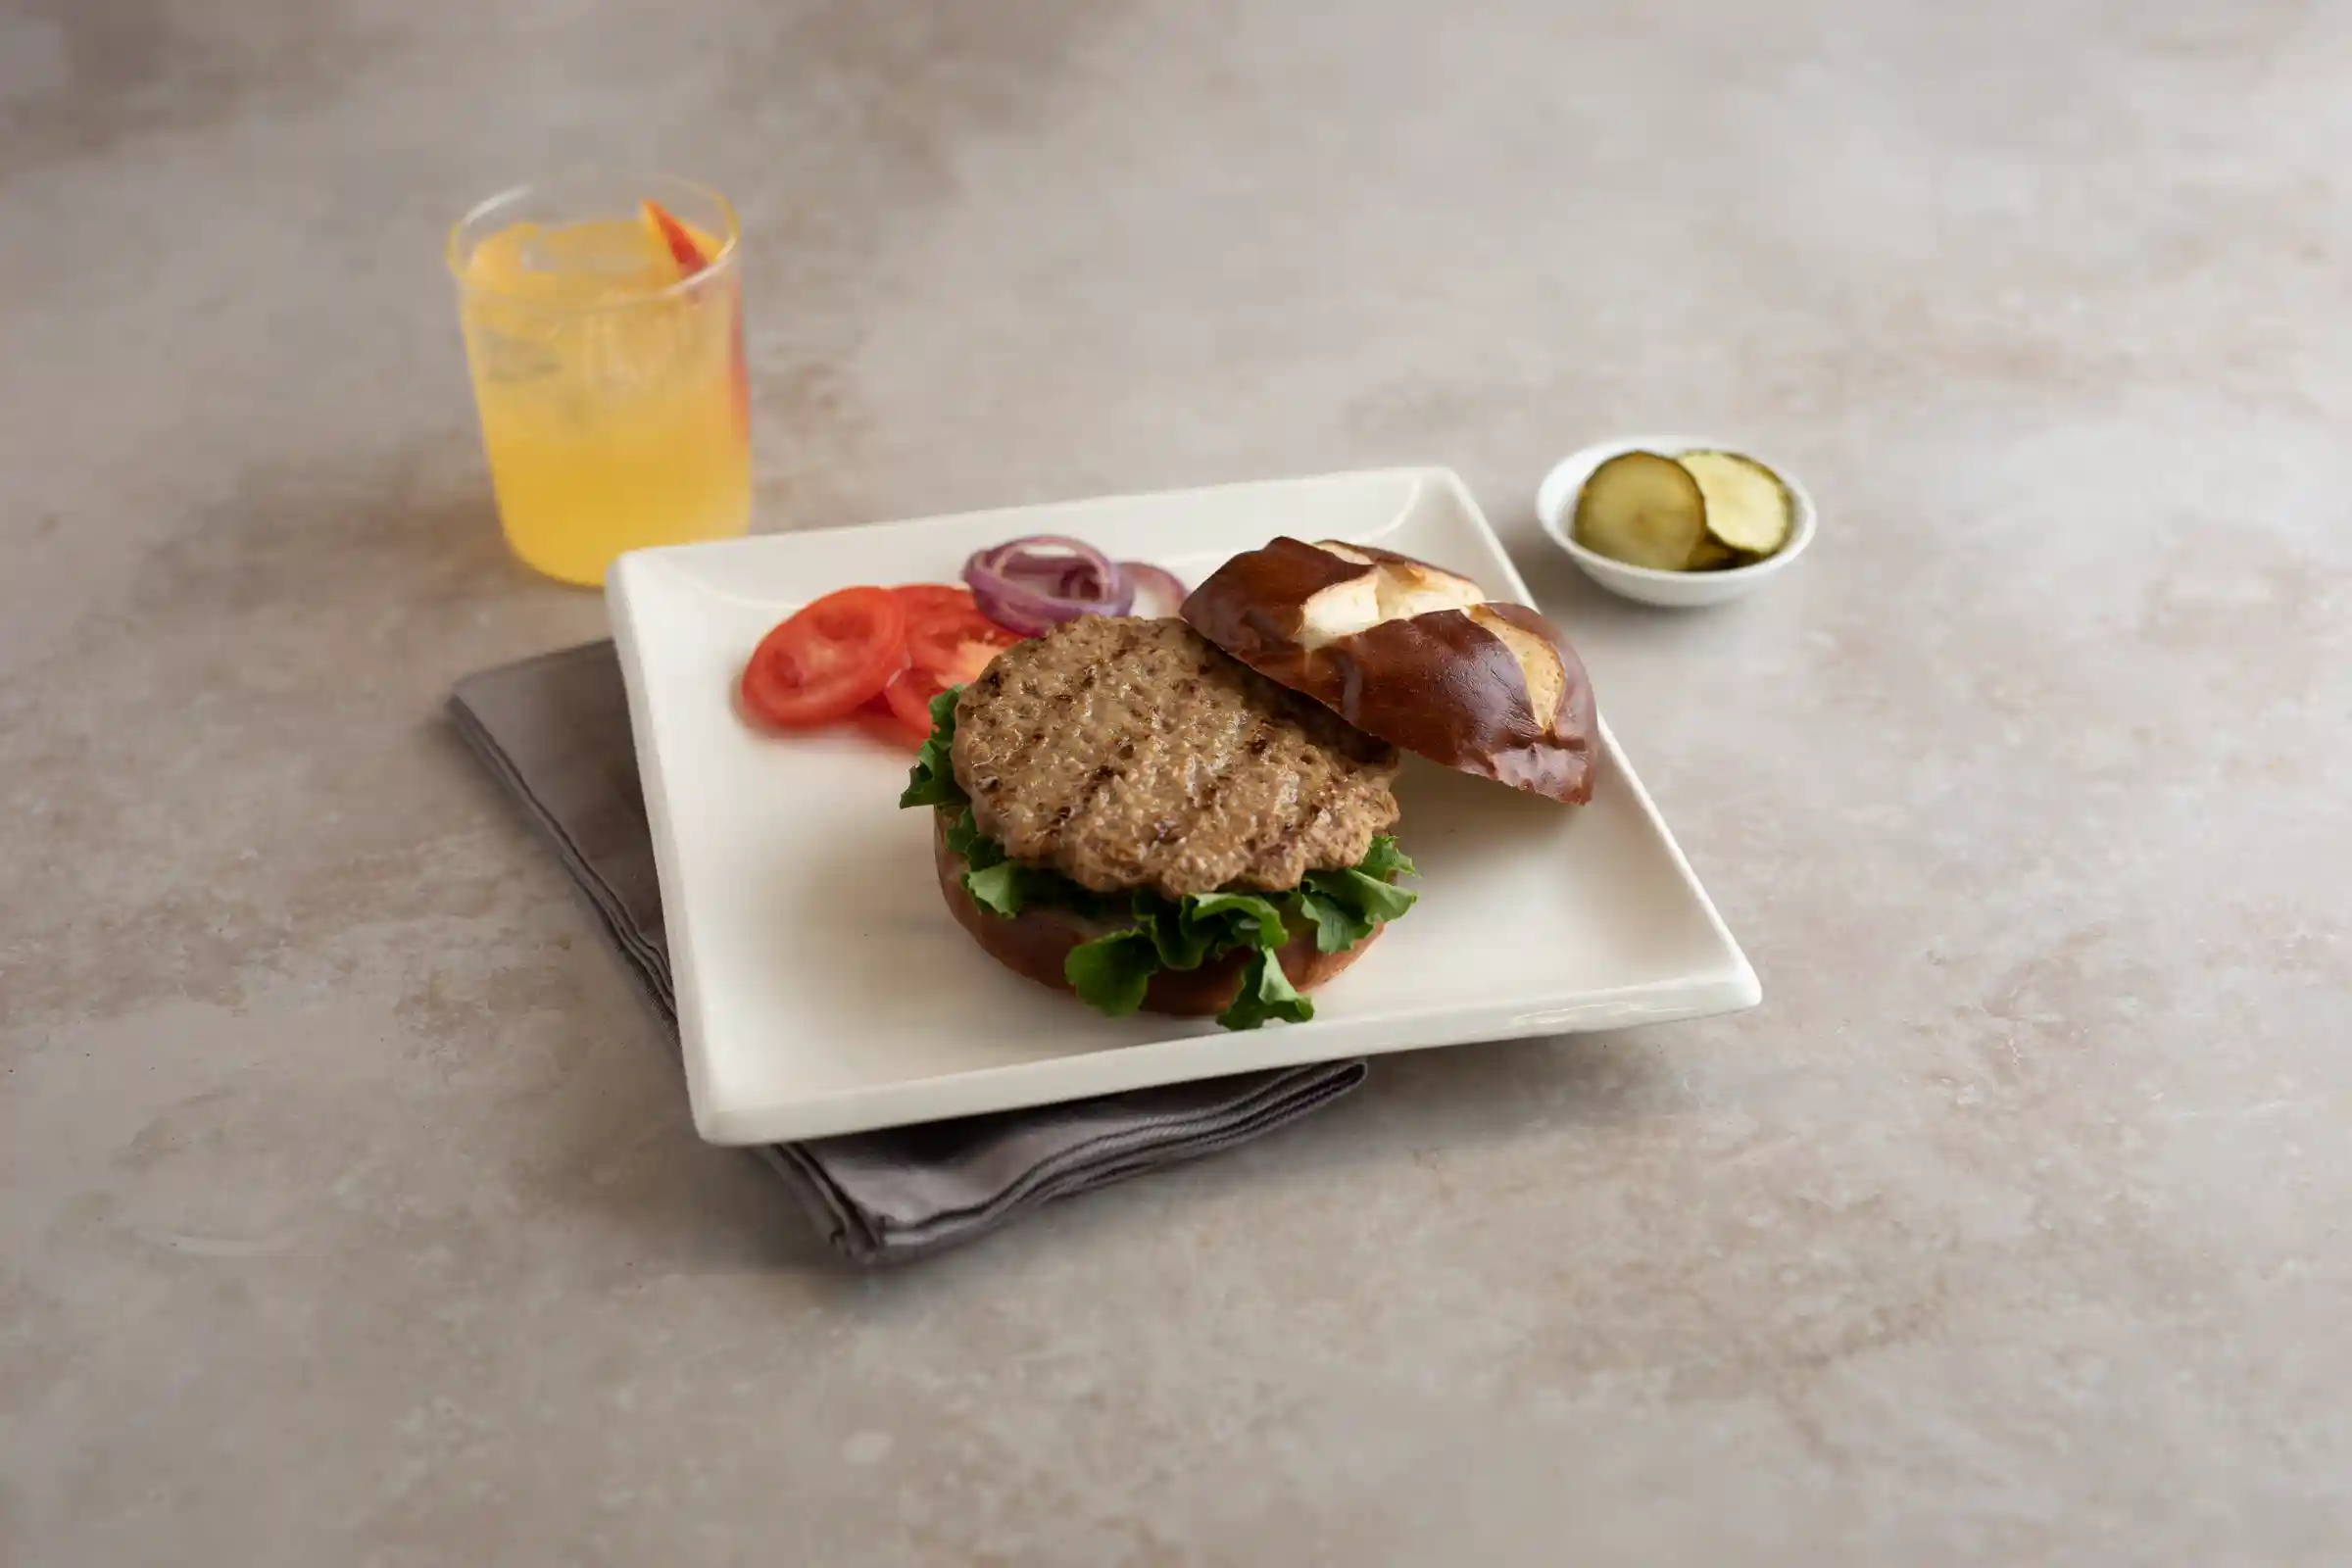 AdvancePierre™ Fully Cooked Flamebroiled Beef Patties with Mushrooms, 2.39 ozhttps://images.salsify.com/image/upload/s--YBMNfDIc--/q_25/c24c04f4qkwiuyhjbhsz.webp